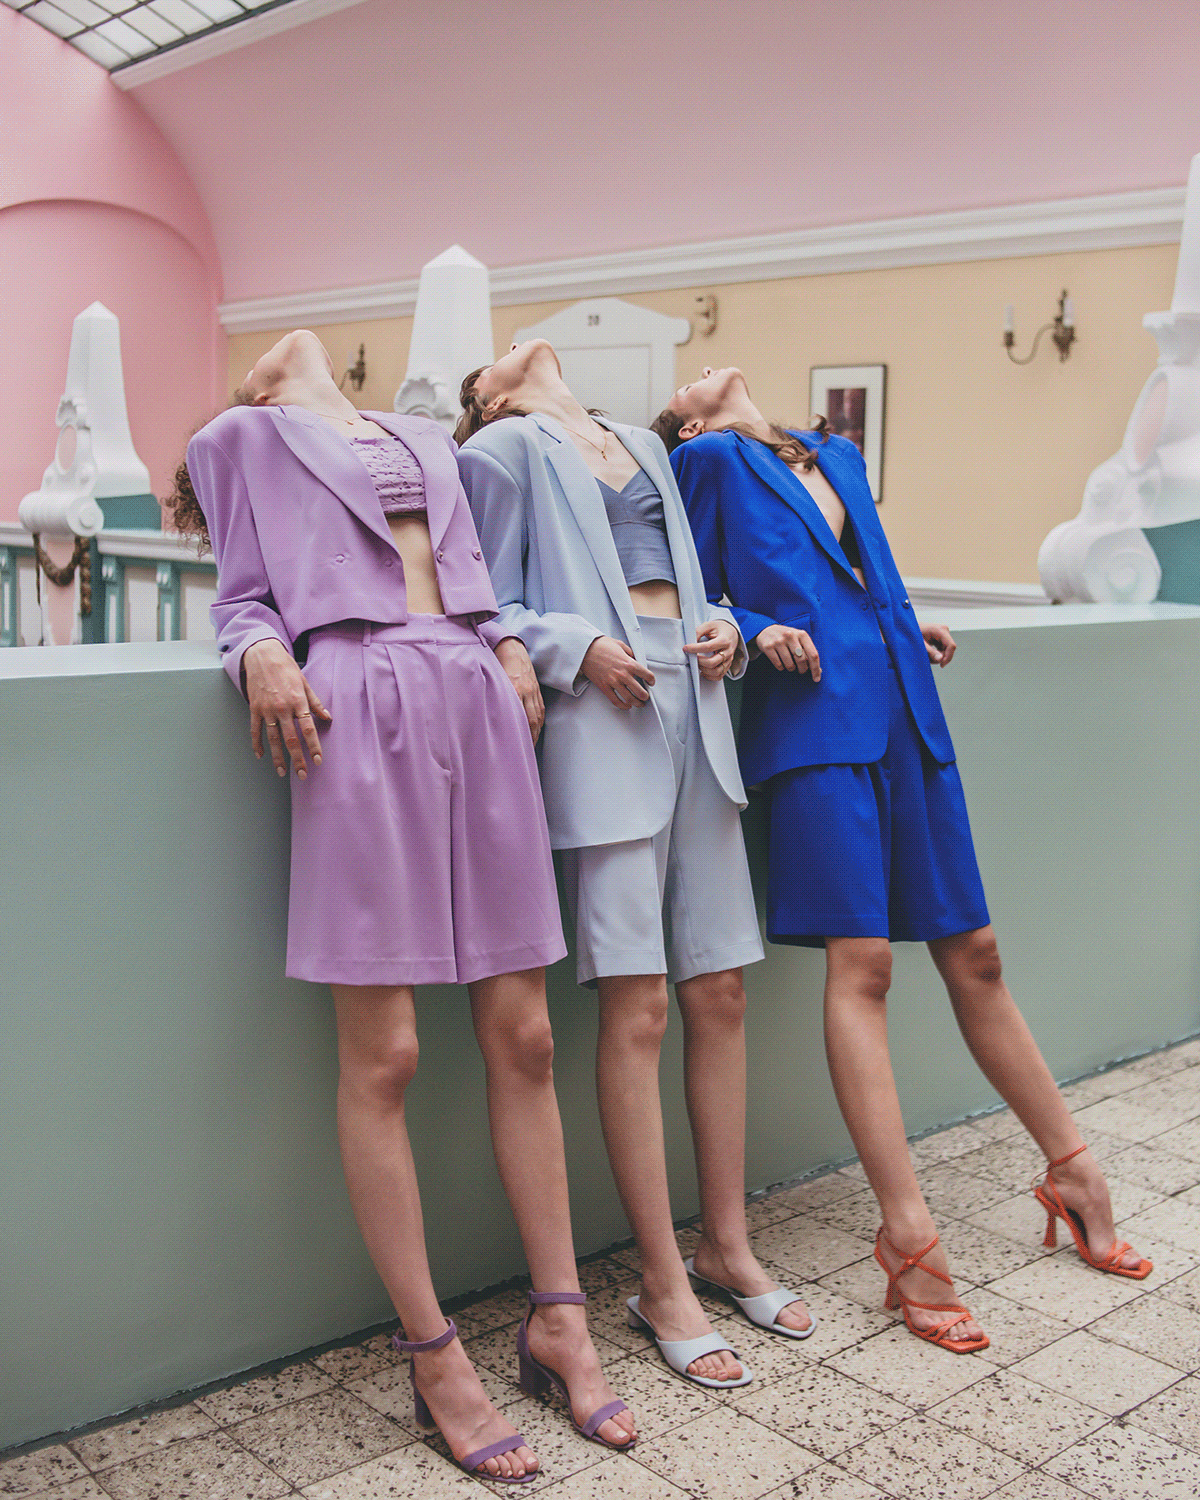 architecture editorial fashion editorial model pastel Photography  photoshoot portrait wes anderson